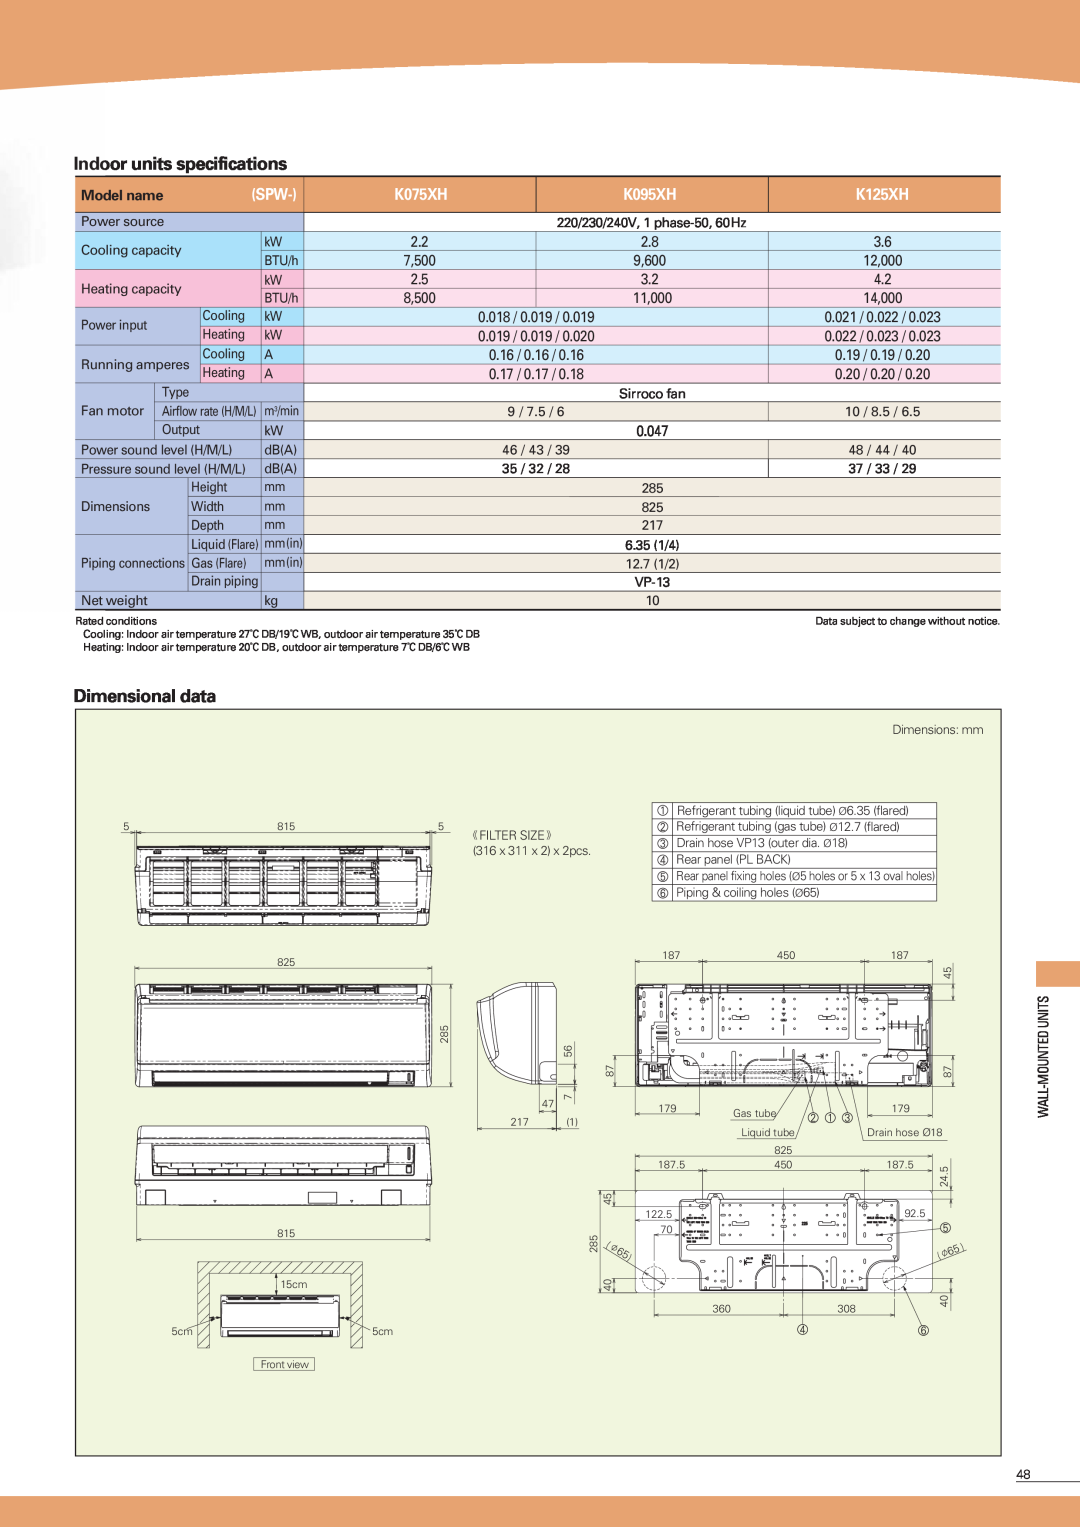 Sanyo SPW-K075XH, SPW-K125XH, SPW-K095XH manual Indoor units specifications, Dimensional data 